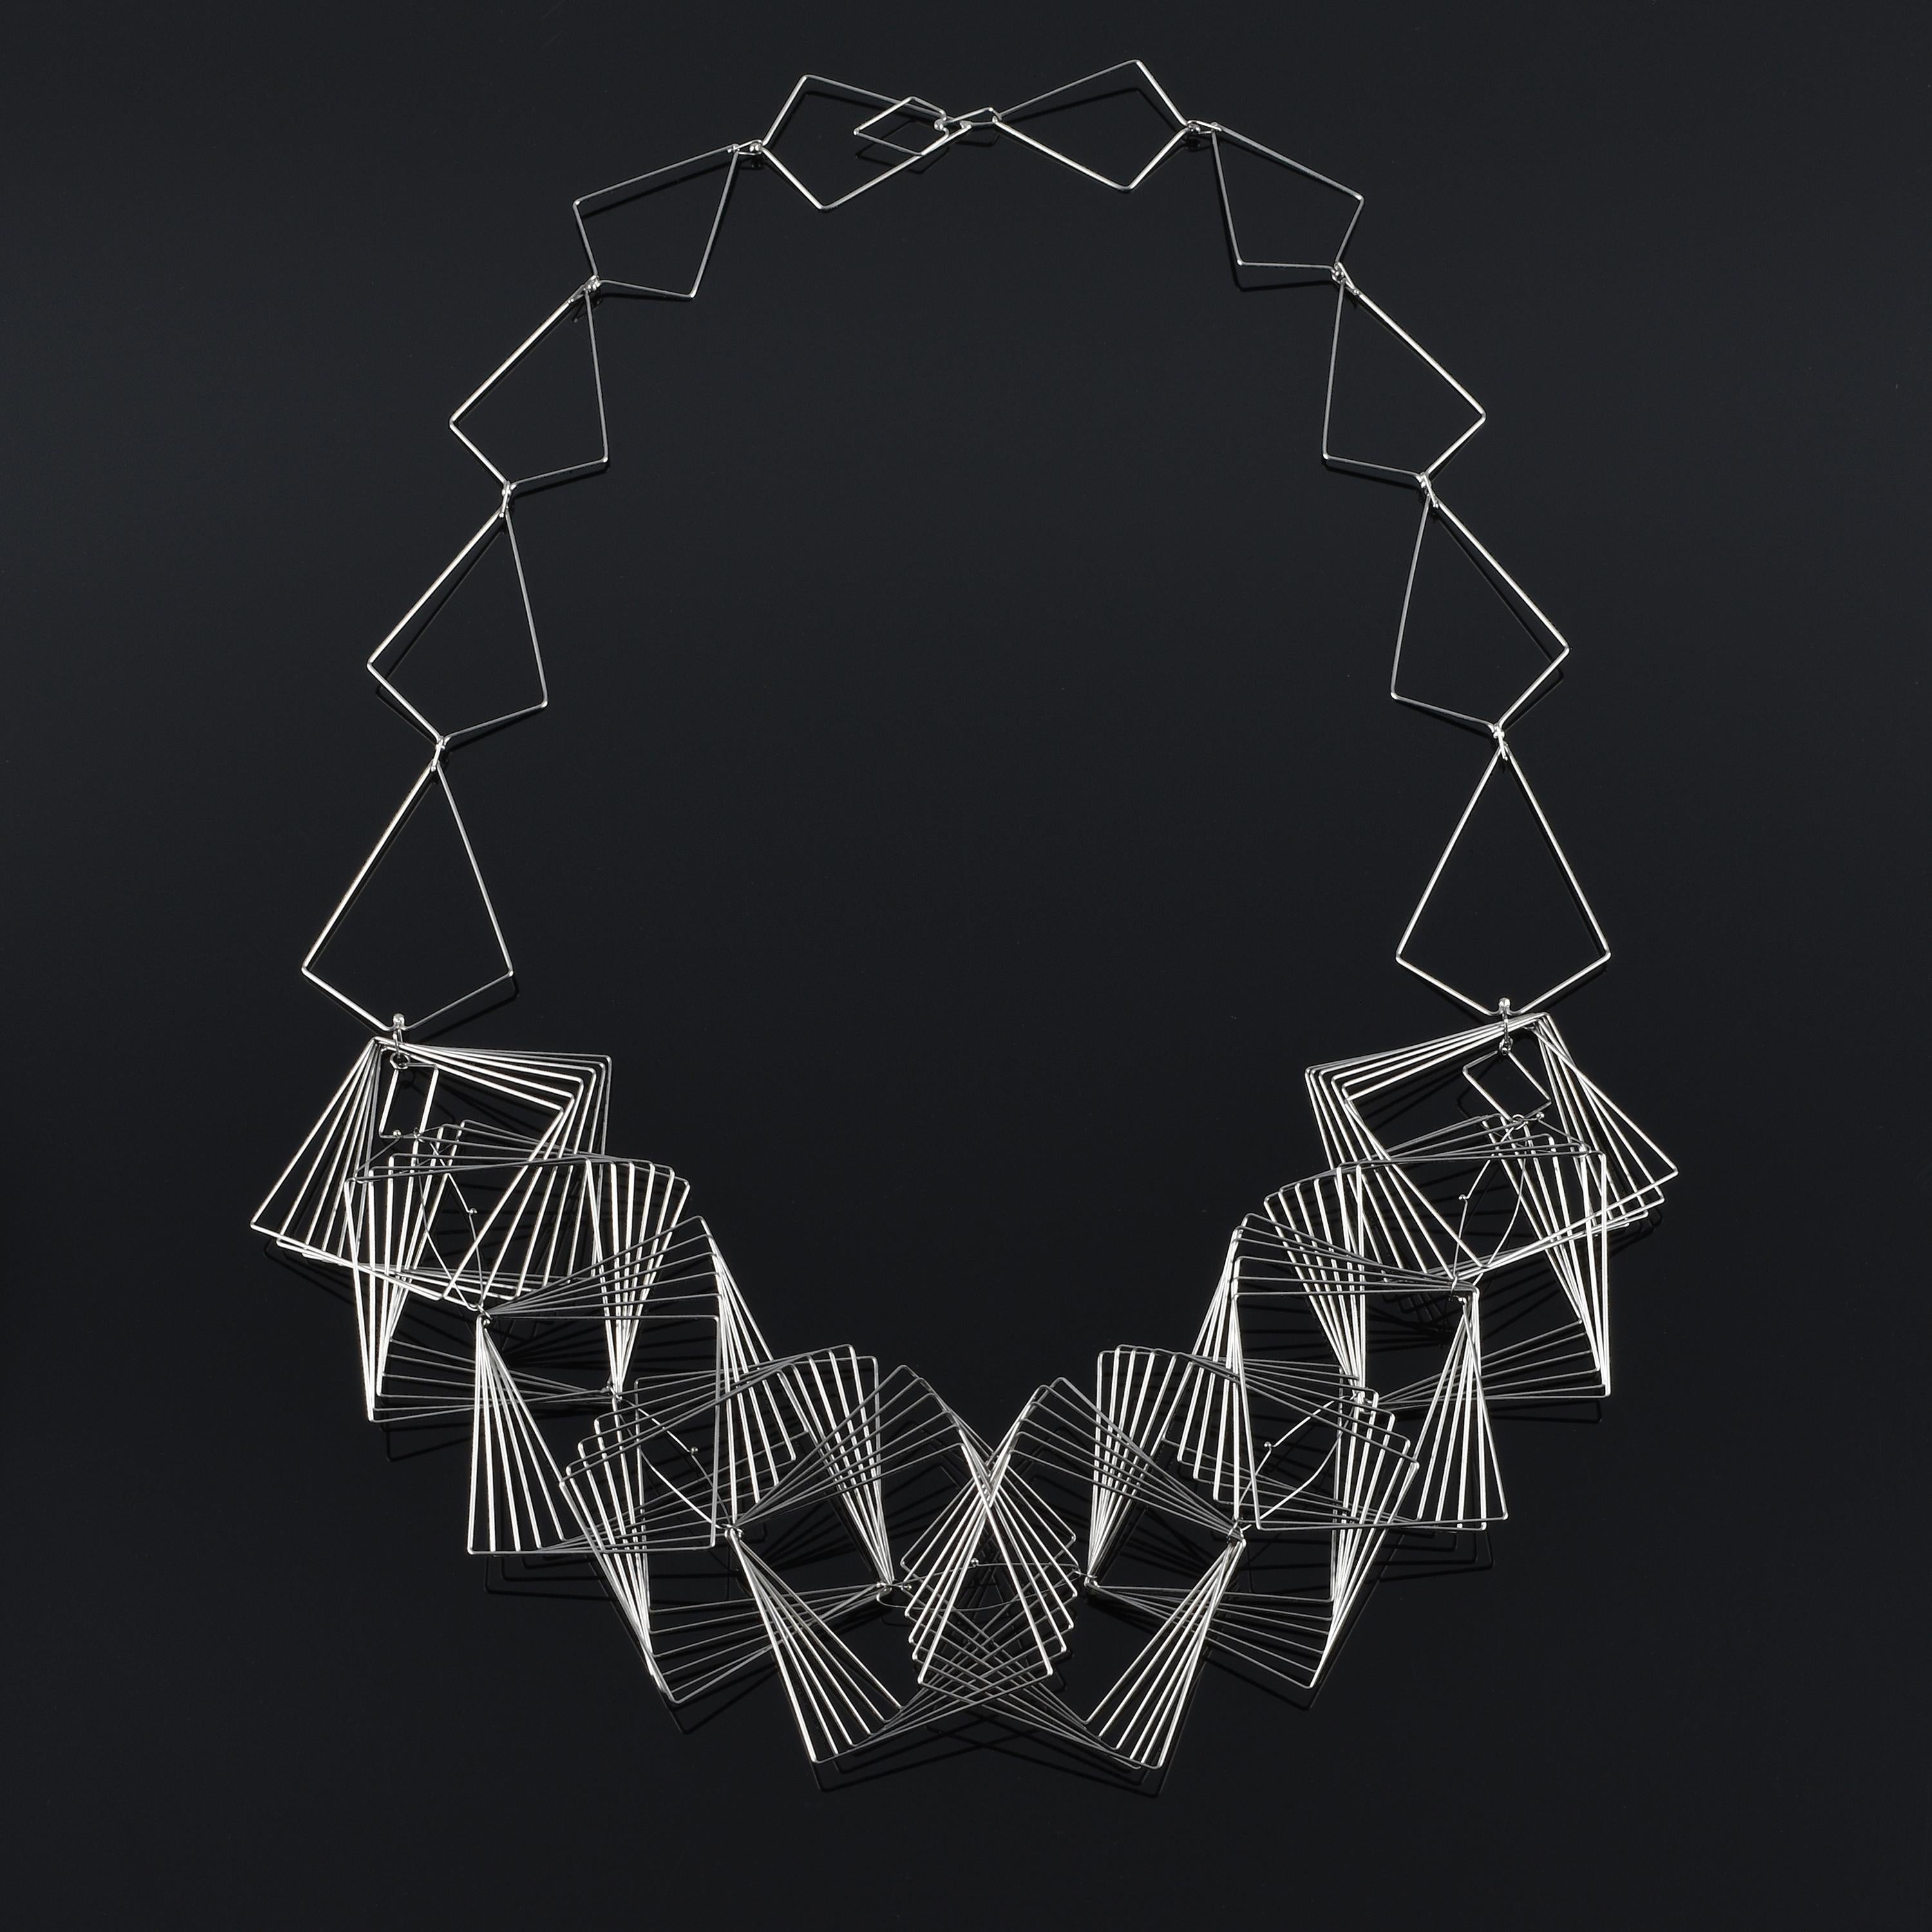 Julie Lake Abstract Sculpture - "Ventalglio Necklace " a contemporary, fine gauge stainless steel necklace